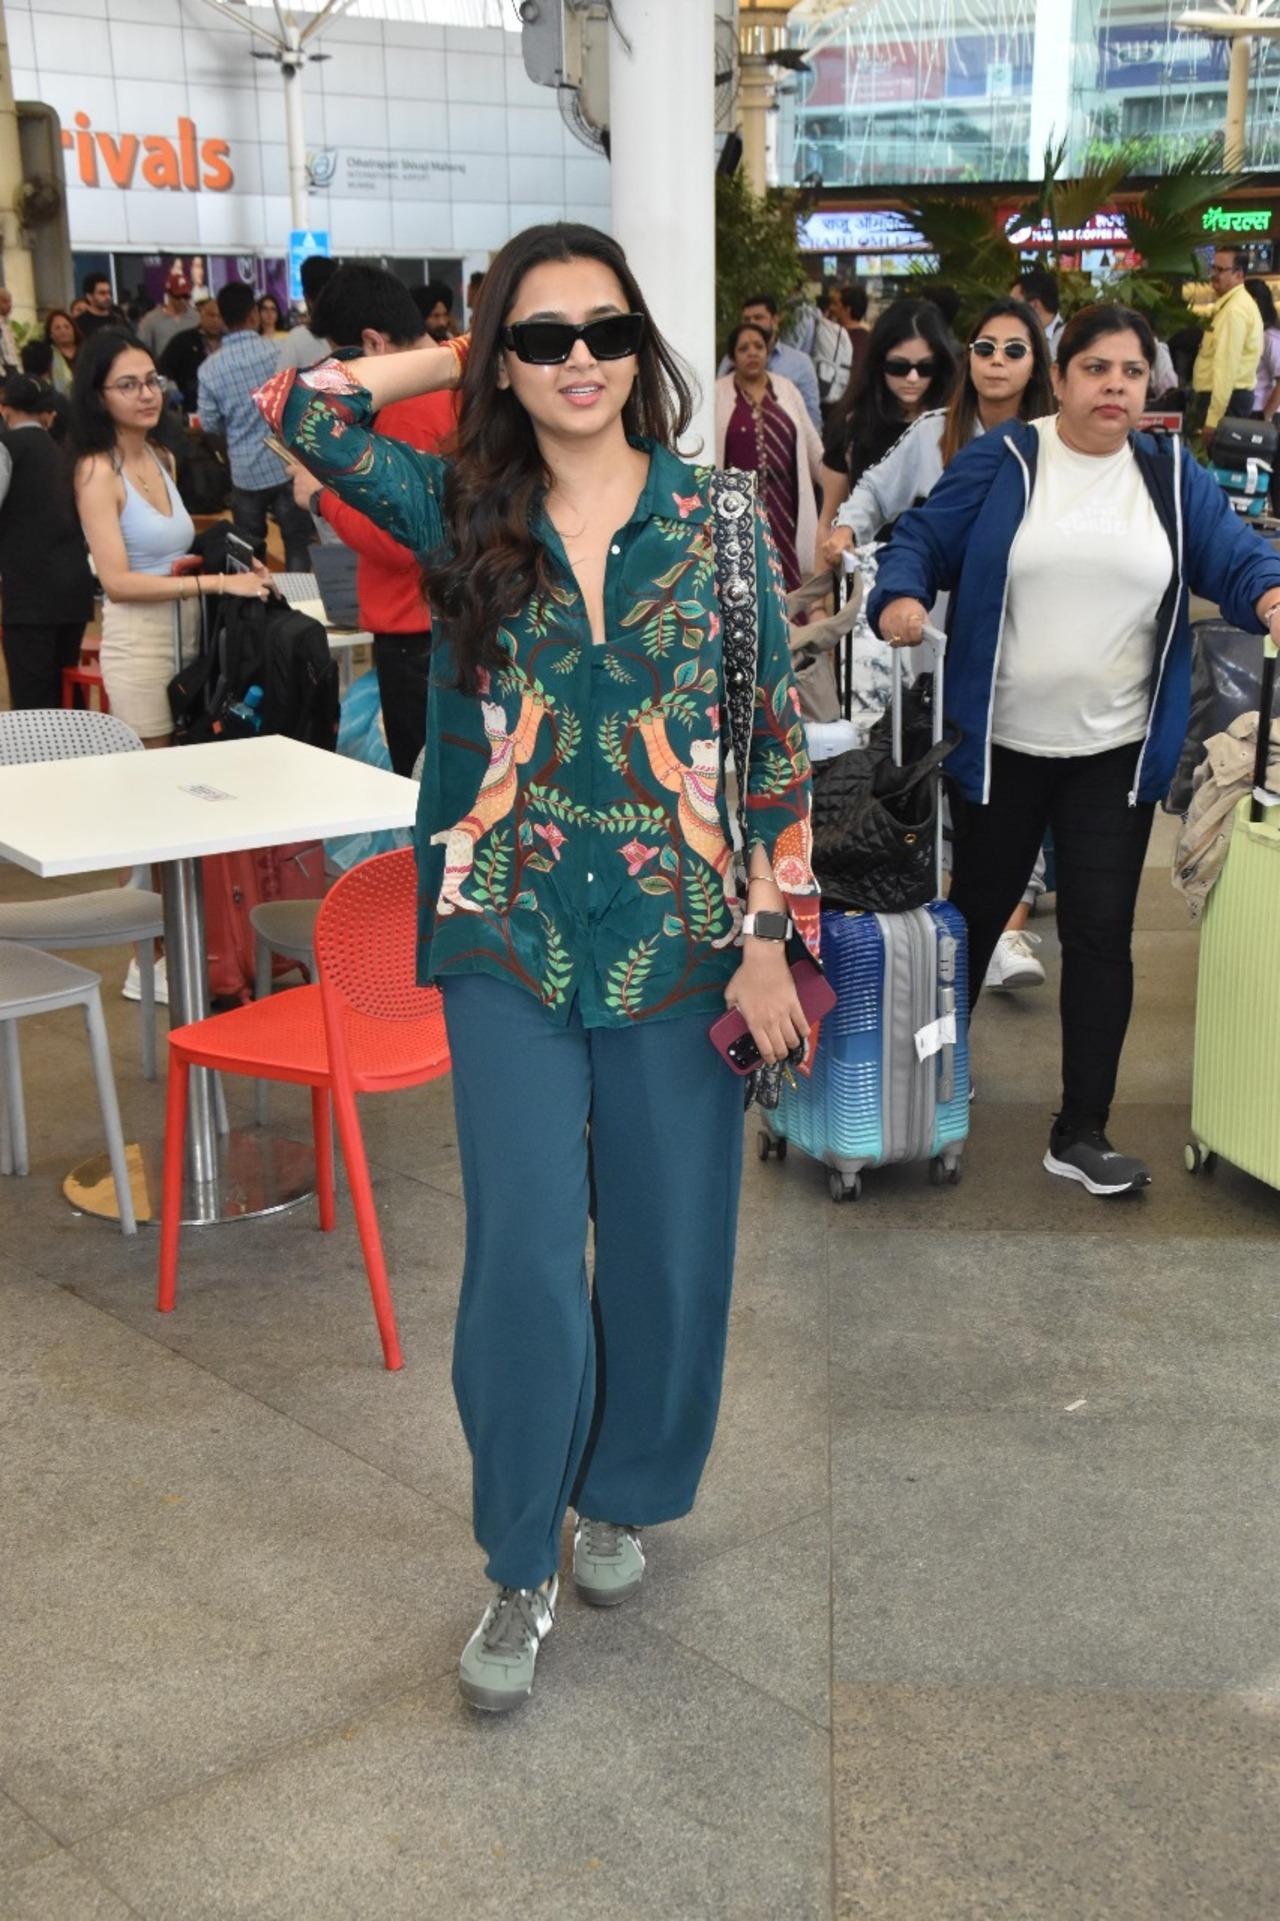 'Bigg Boss 15' winner Tejasswi Prakash left the airport wearing a loose green floral top, which she donned with light blue leggings